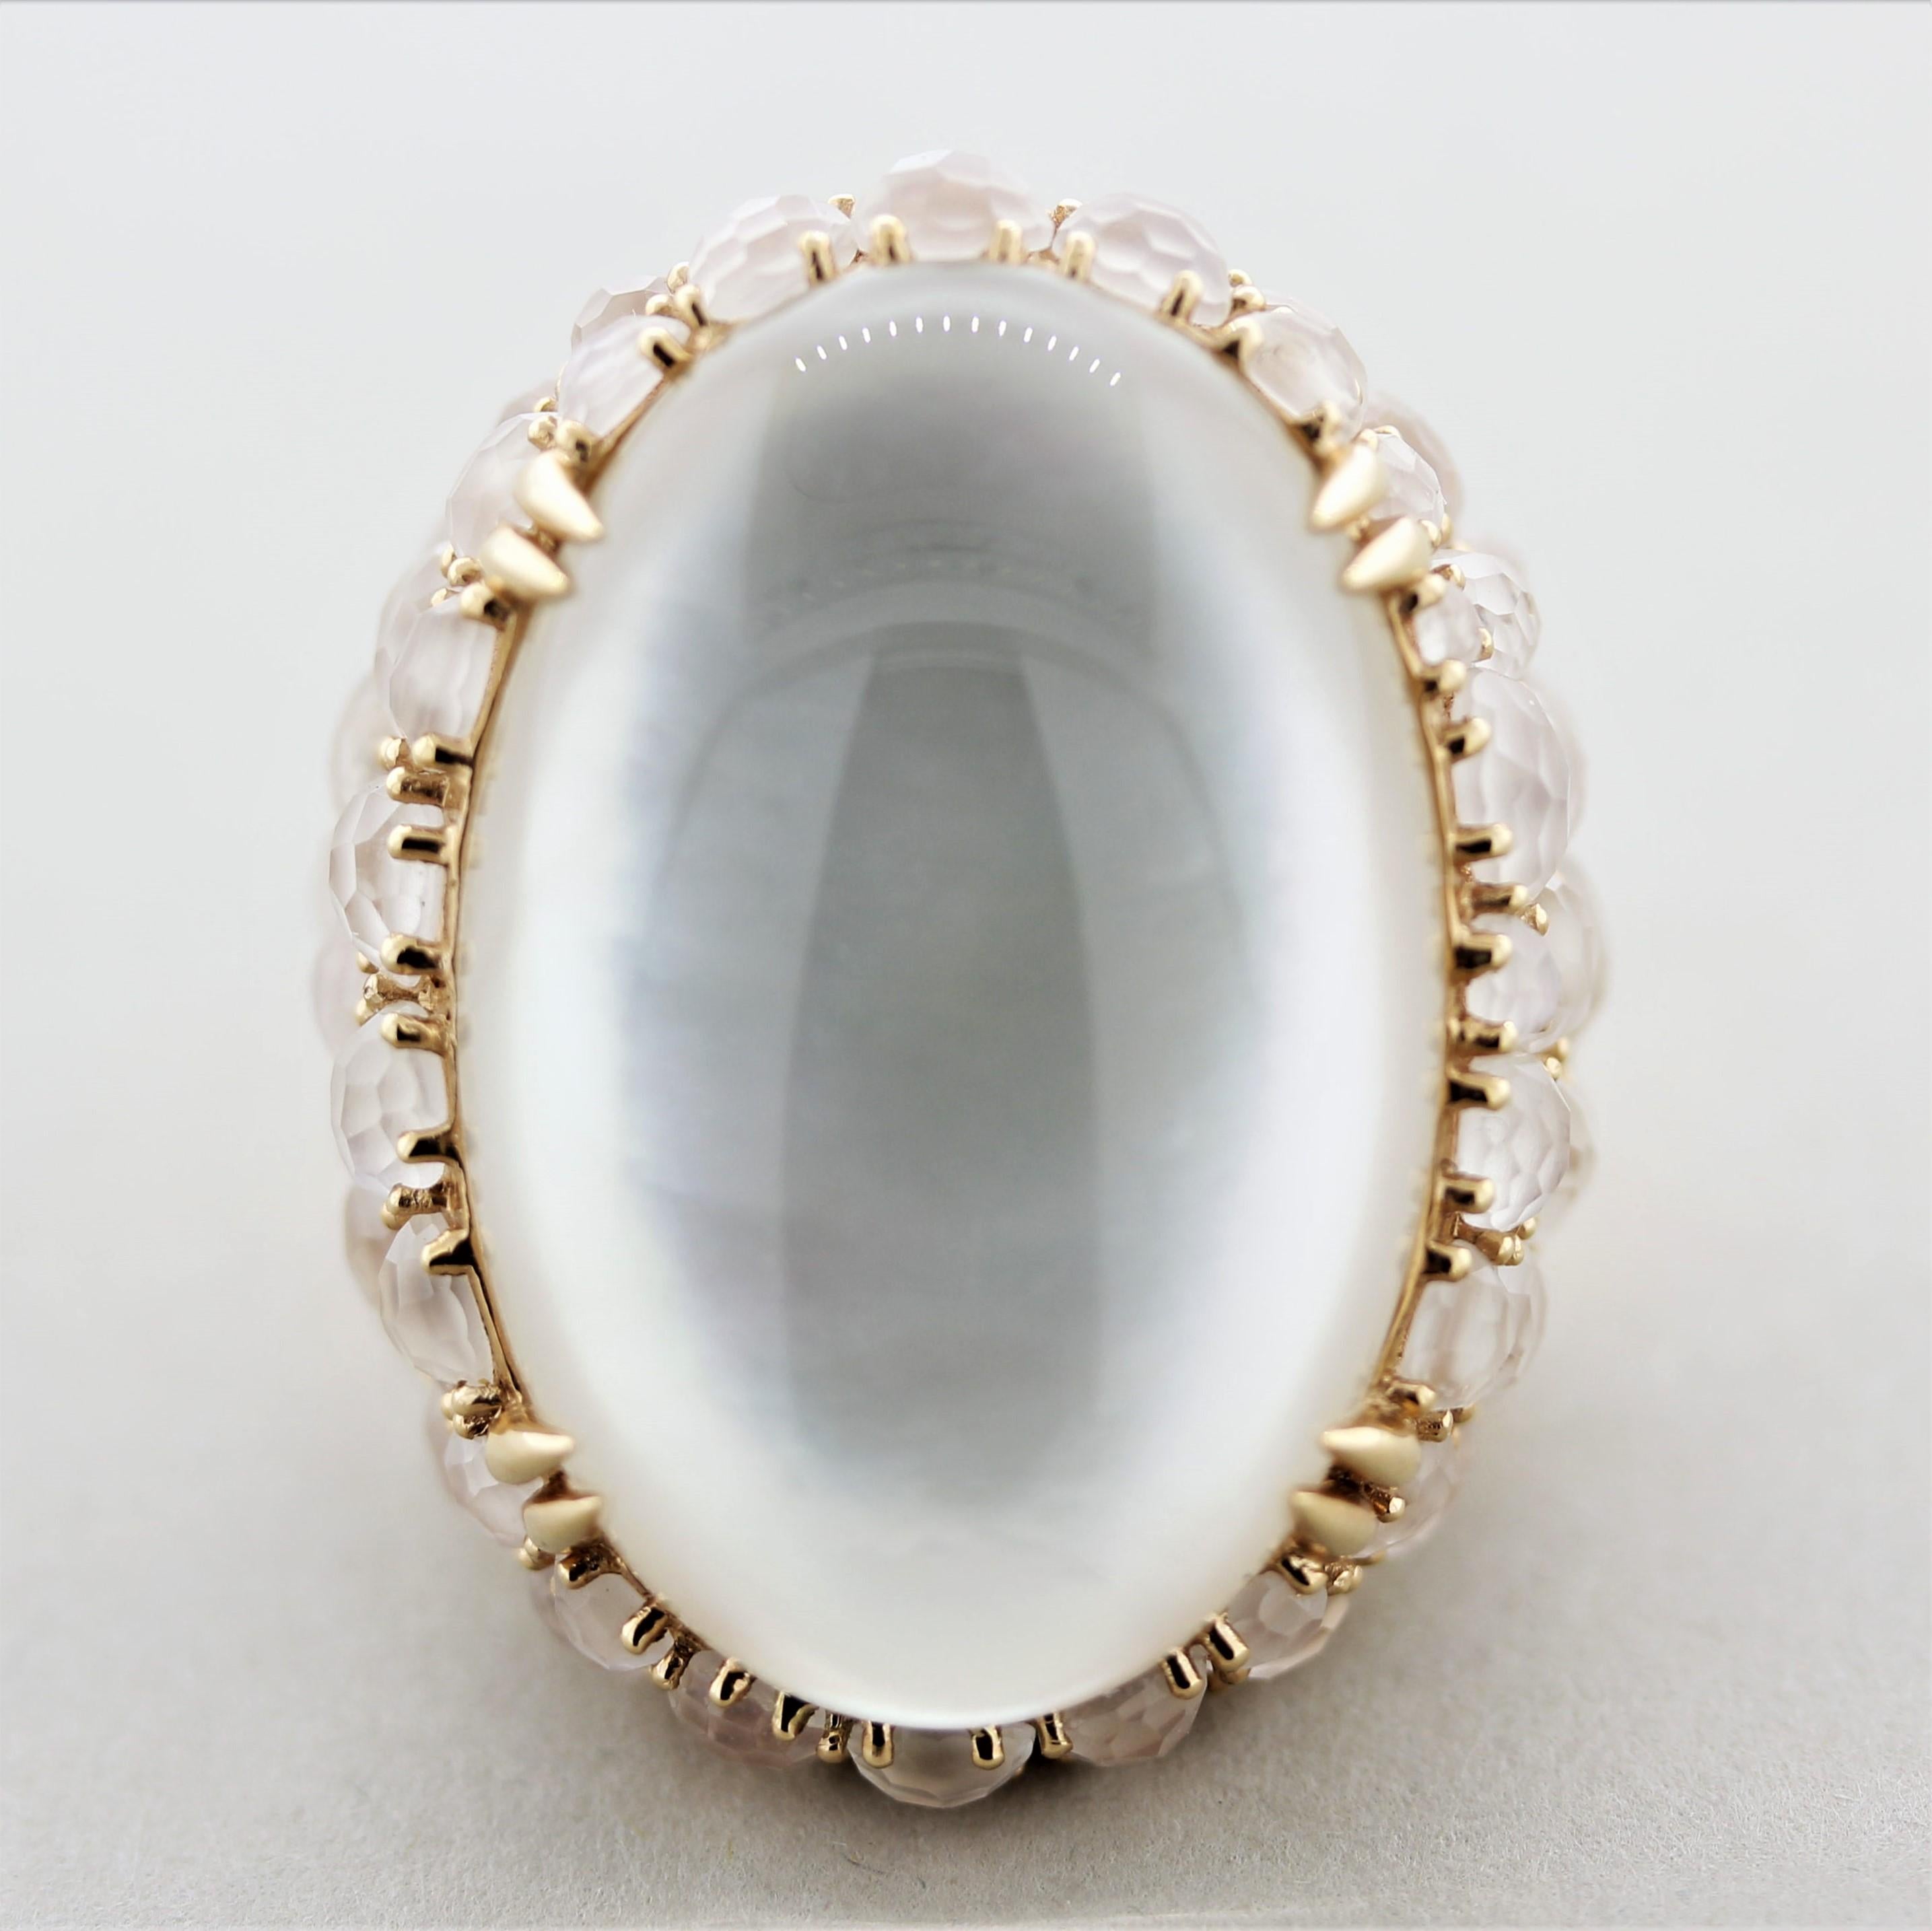 Moonstone Rock-Crystal Mother-of-Pearl Gold Cocktail Ring

A large and impressive cocktail ring with unique gems with special phenomena! It features a large smooth cabochon rock-crystal quartz which is set over a flat piece of mother-of-pearl giving